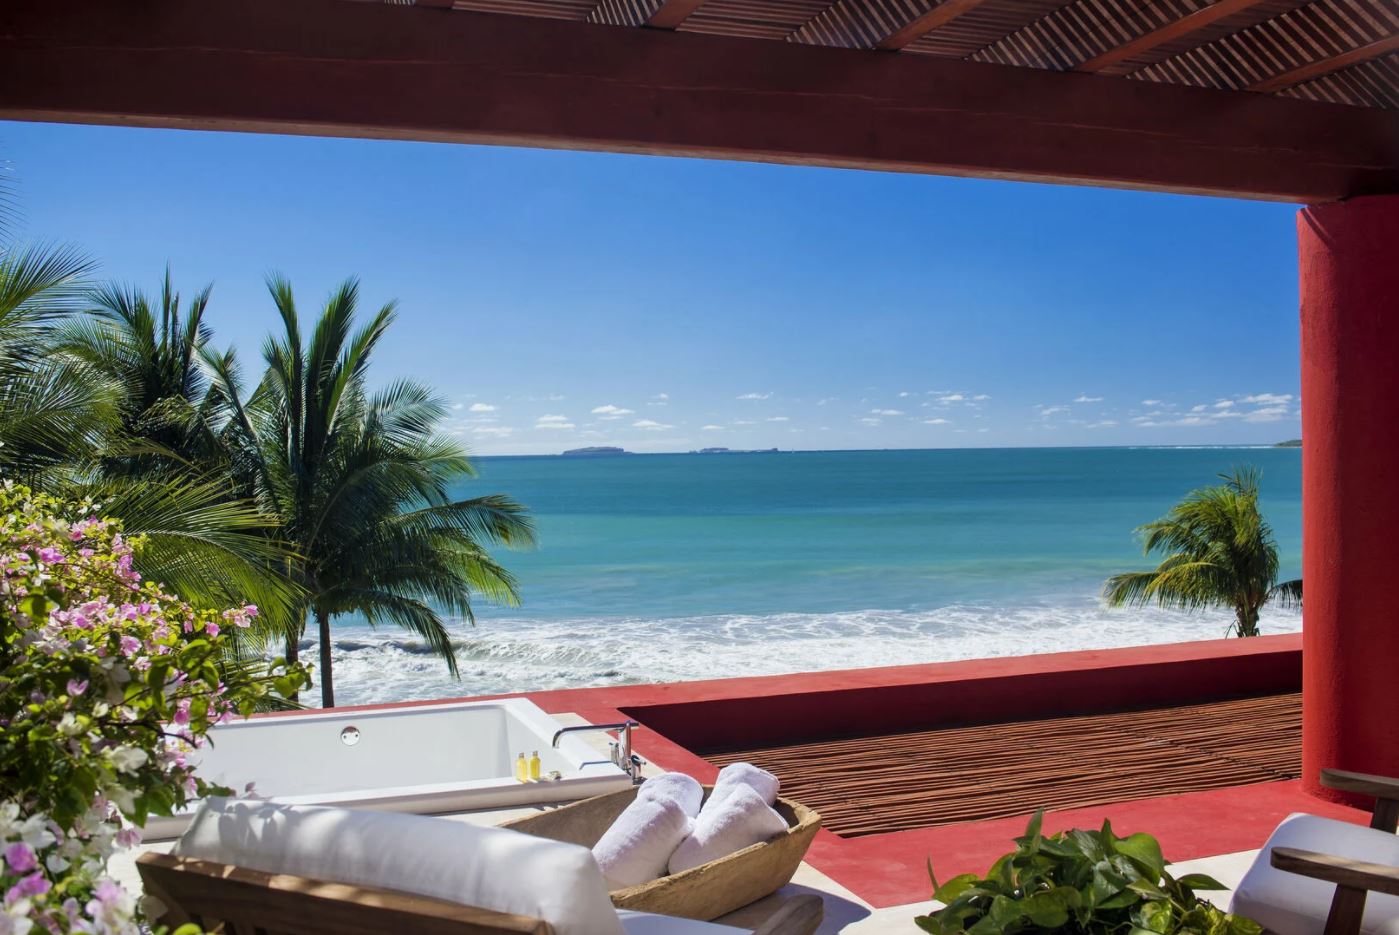 Views from the open bedroom/bathroom area of one of our Punta Mita Villas